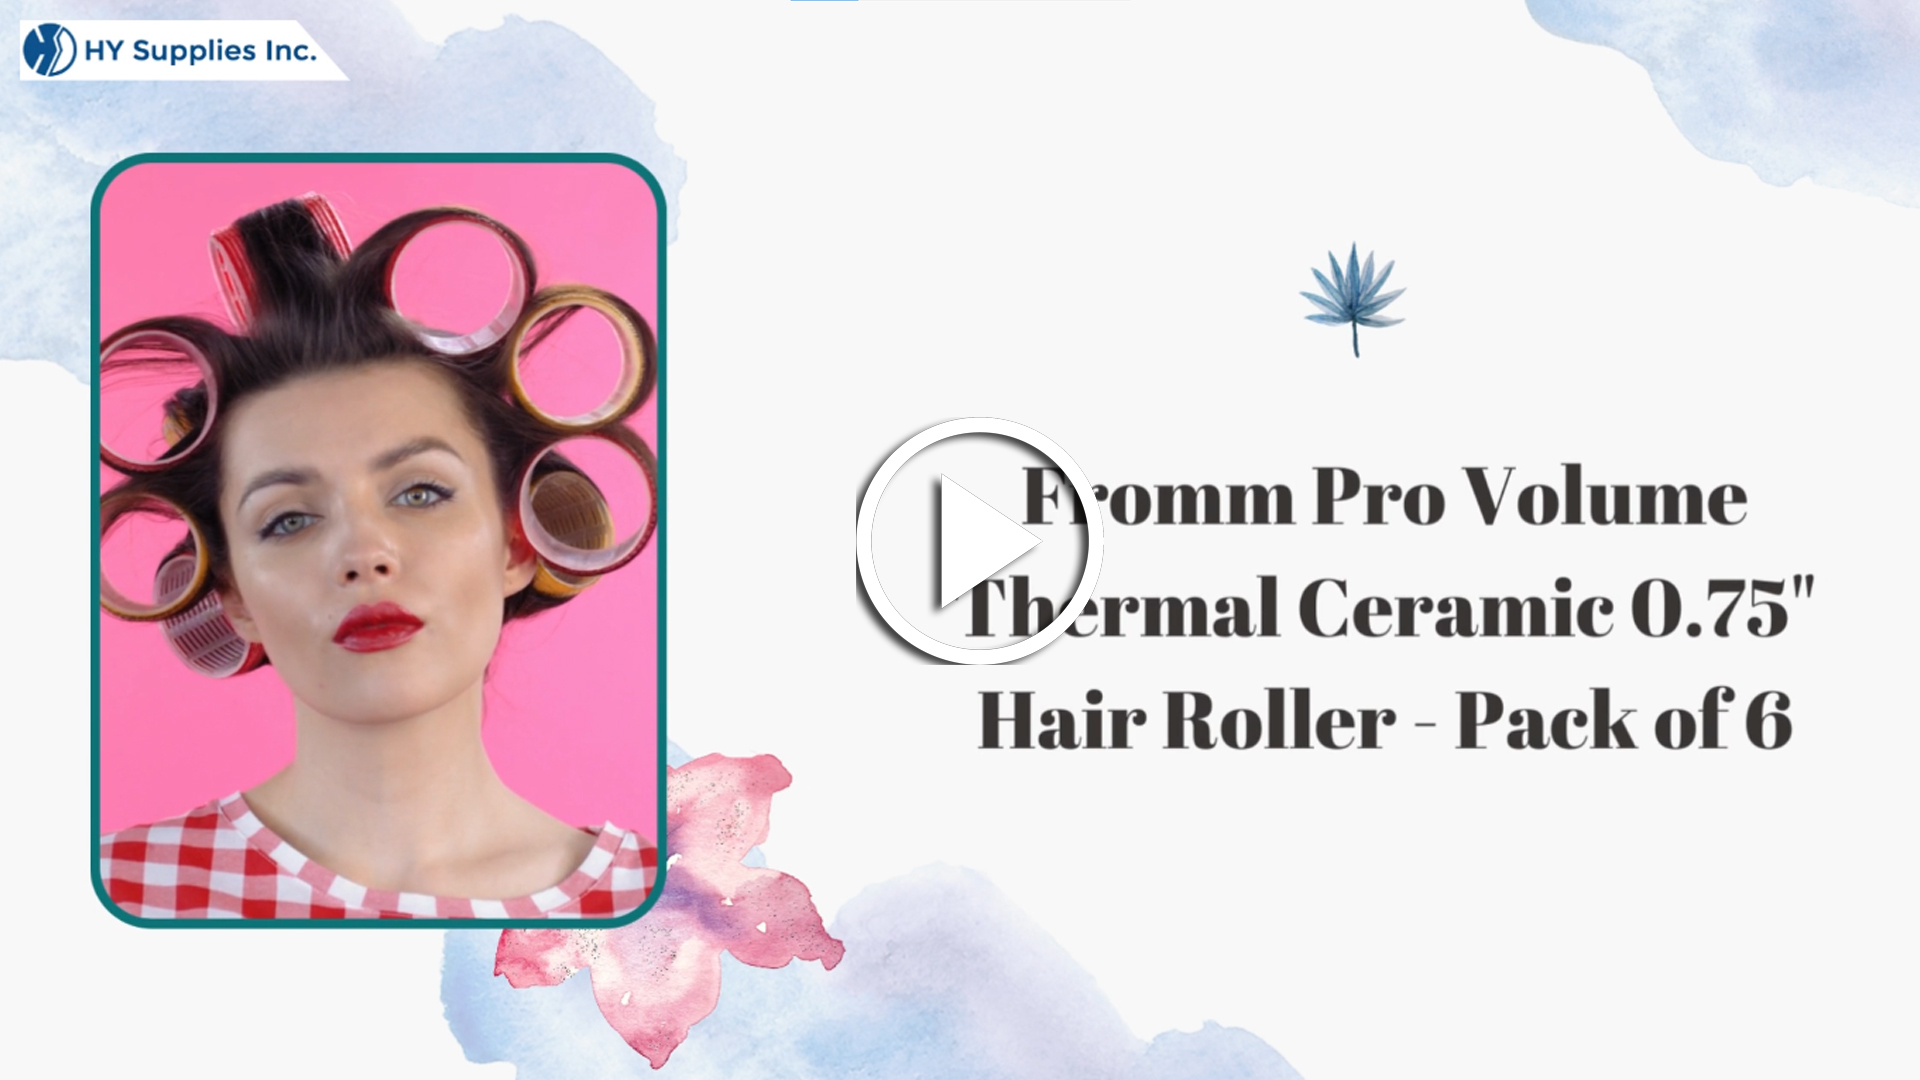 Fromm Pro Volume Thermal Ceramic 0.75" Hair Roller - Pack of 6